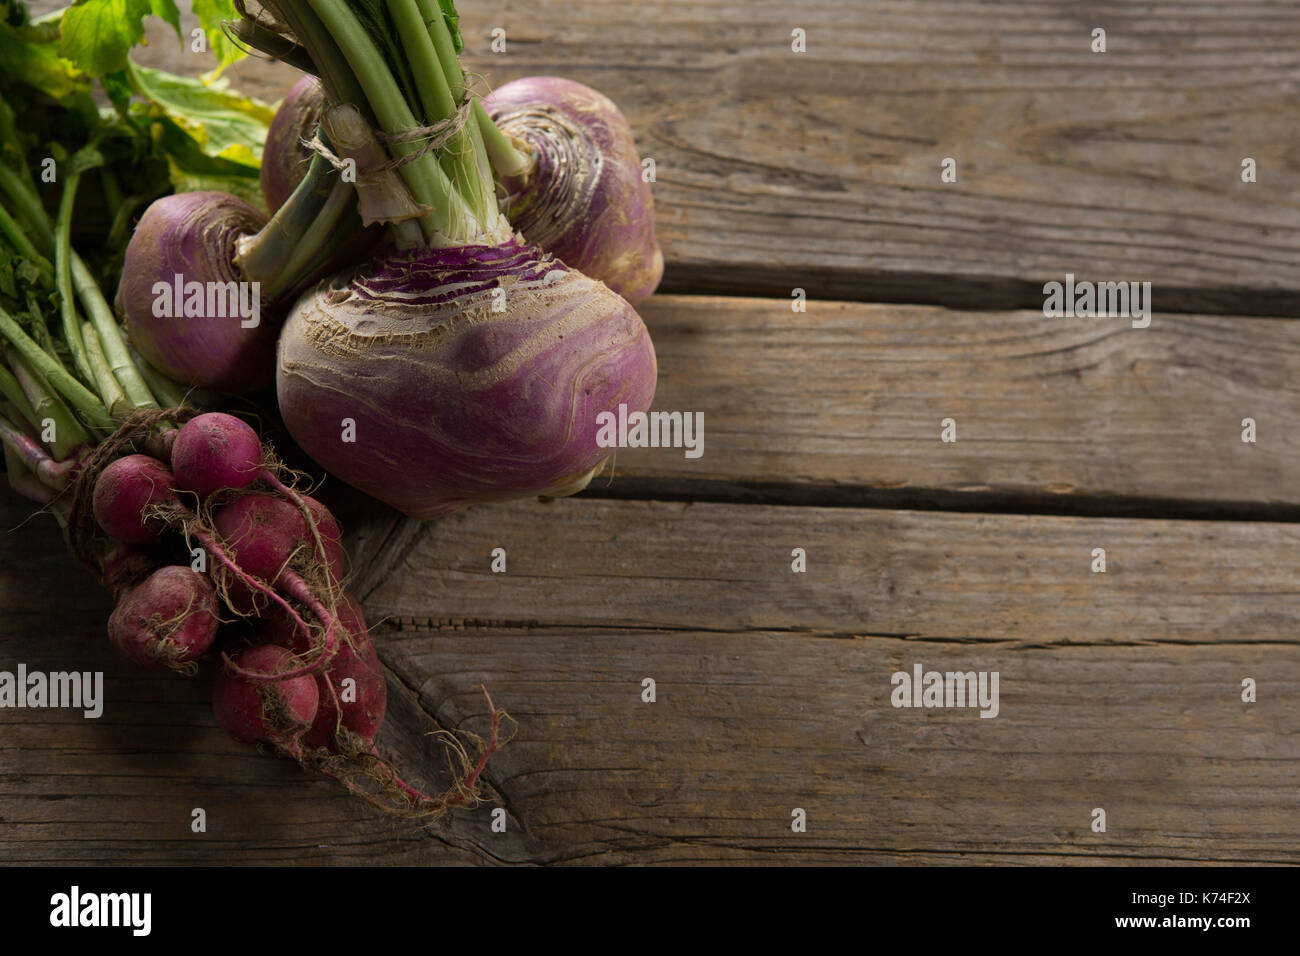 Close-up of beetroot and turnip on wooden table Stock Photo